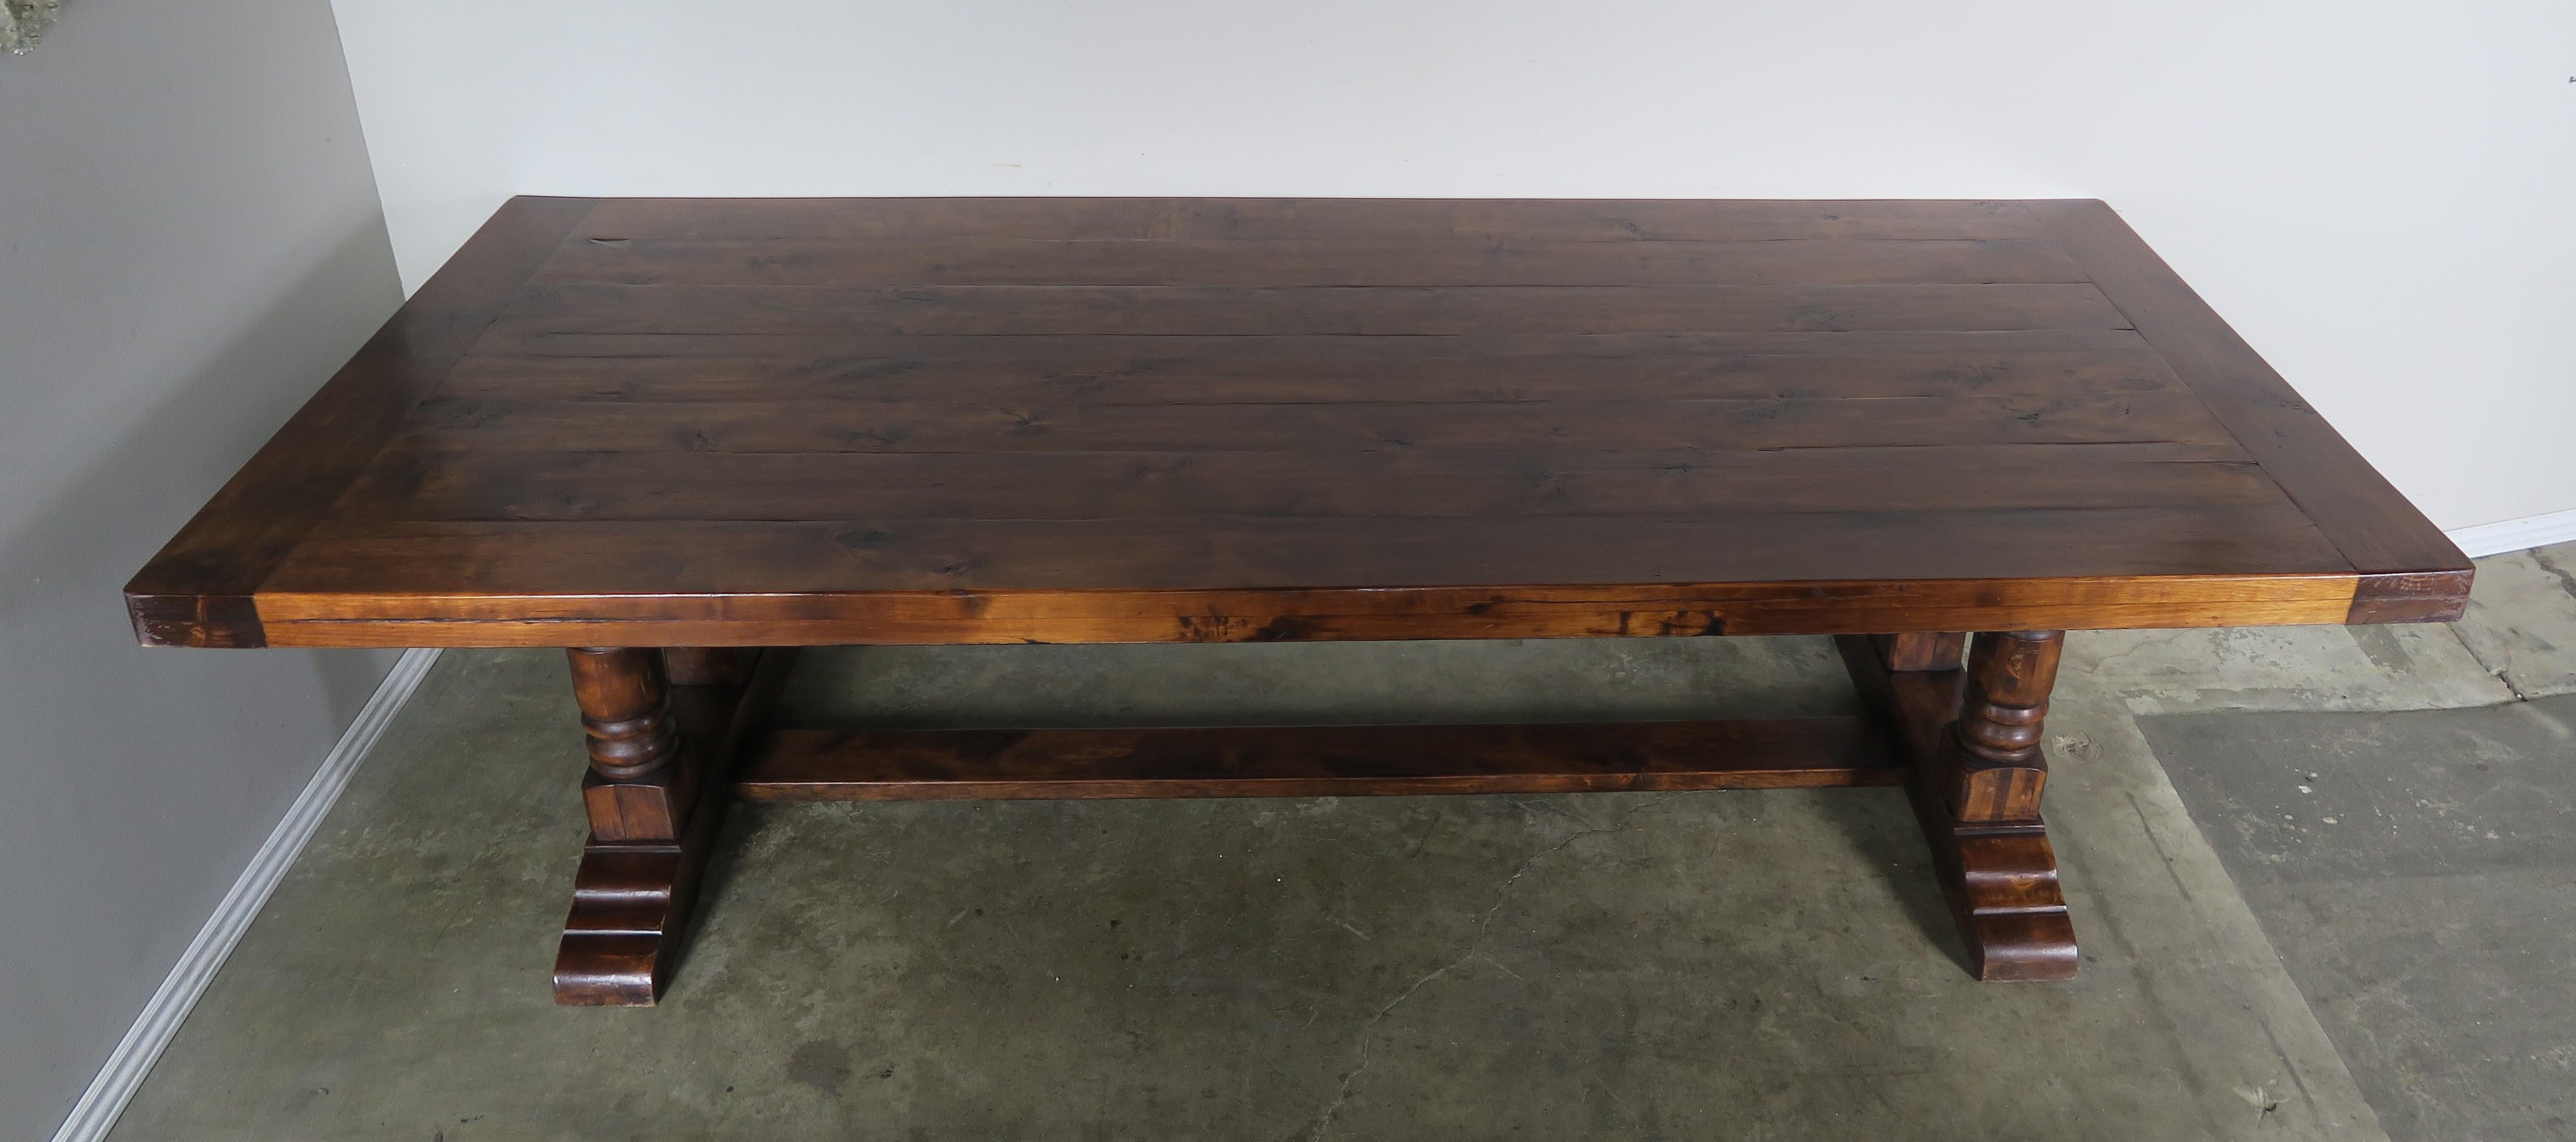 Mid-20th century Spanish walnut trestle table standing on two pedestal bases connected by a centre stretcher. This heavy table has a 3